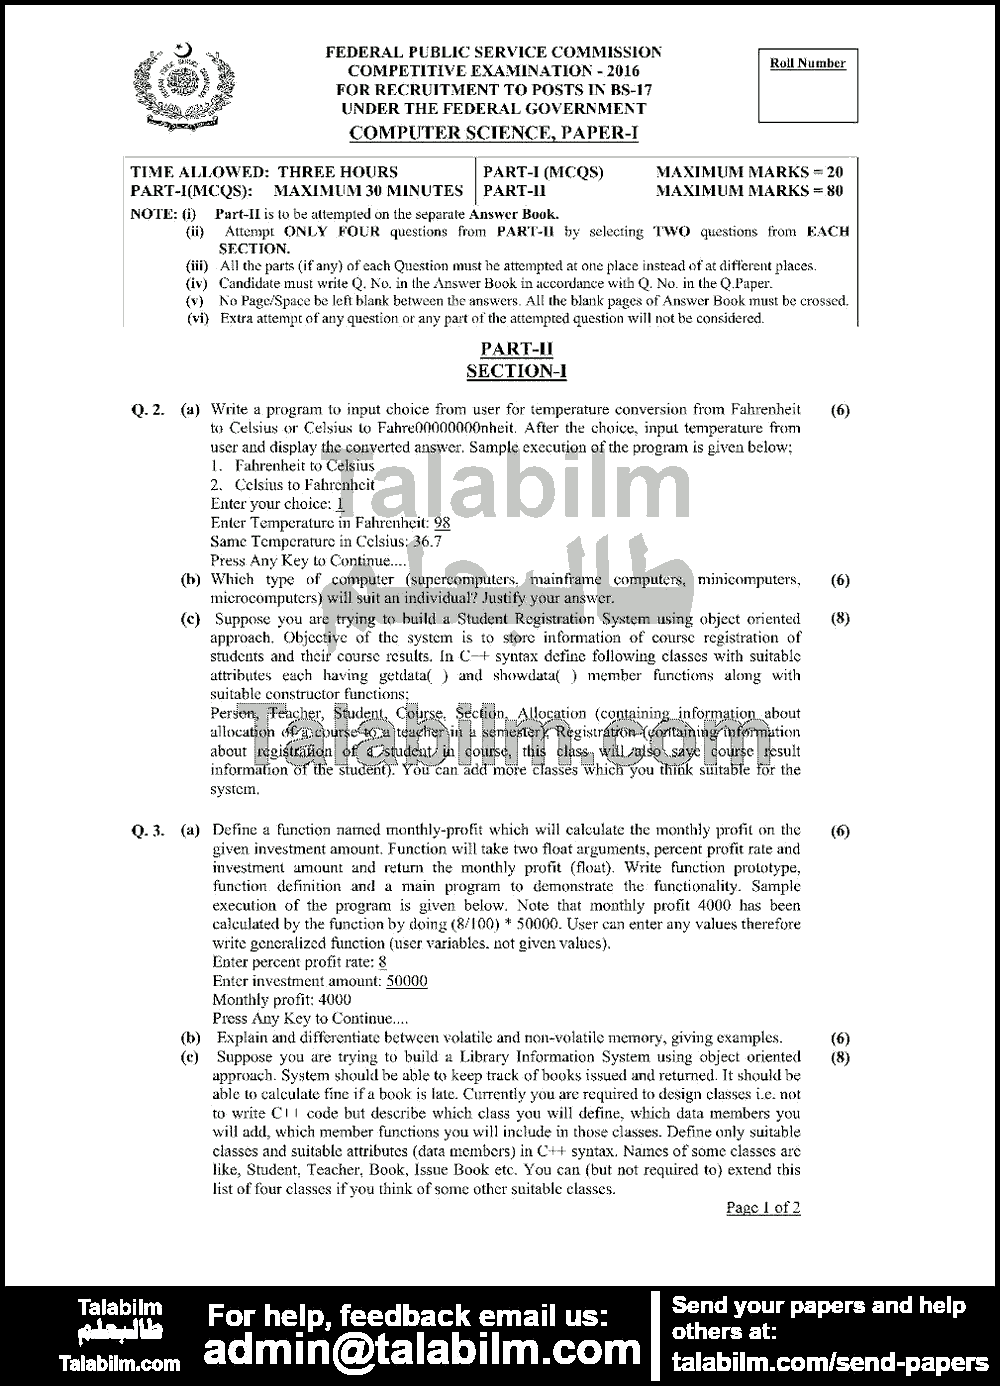 Computer Science 0 past paper for 2016